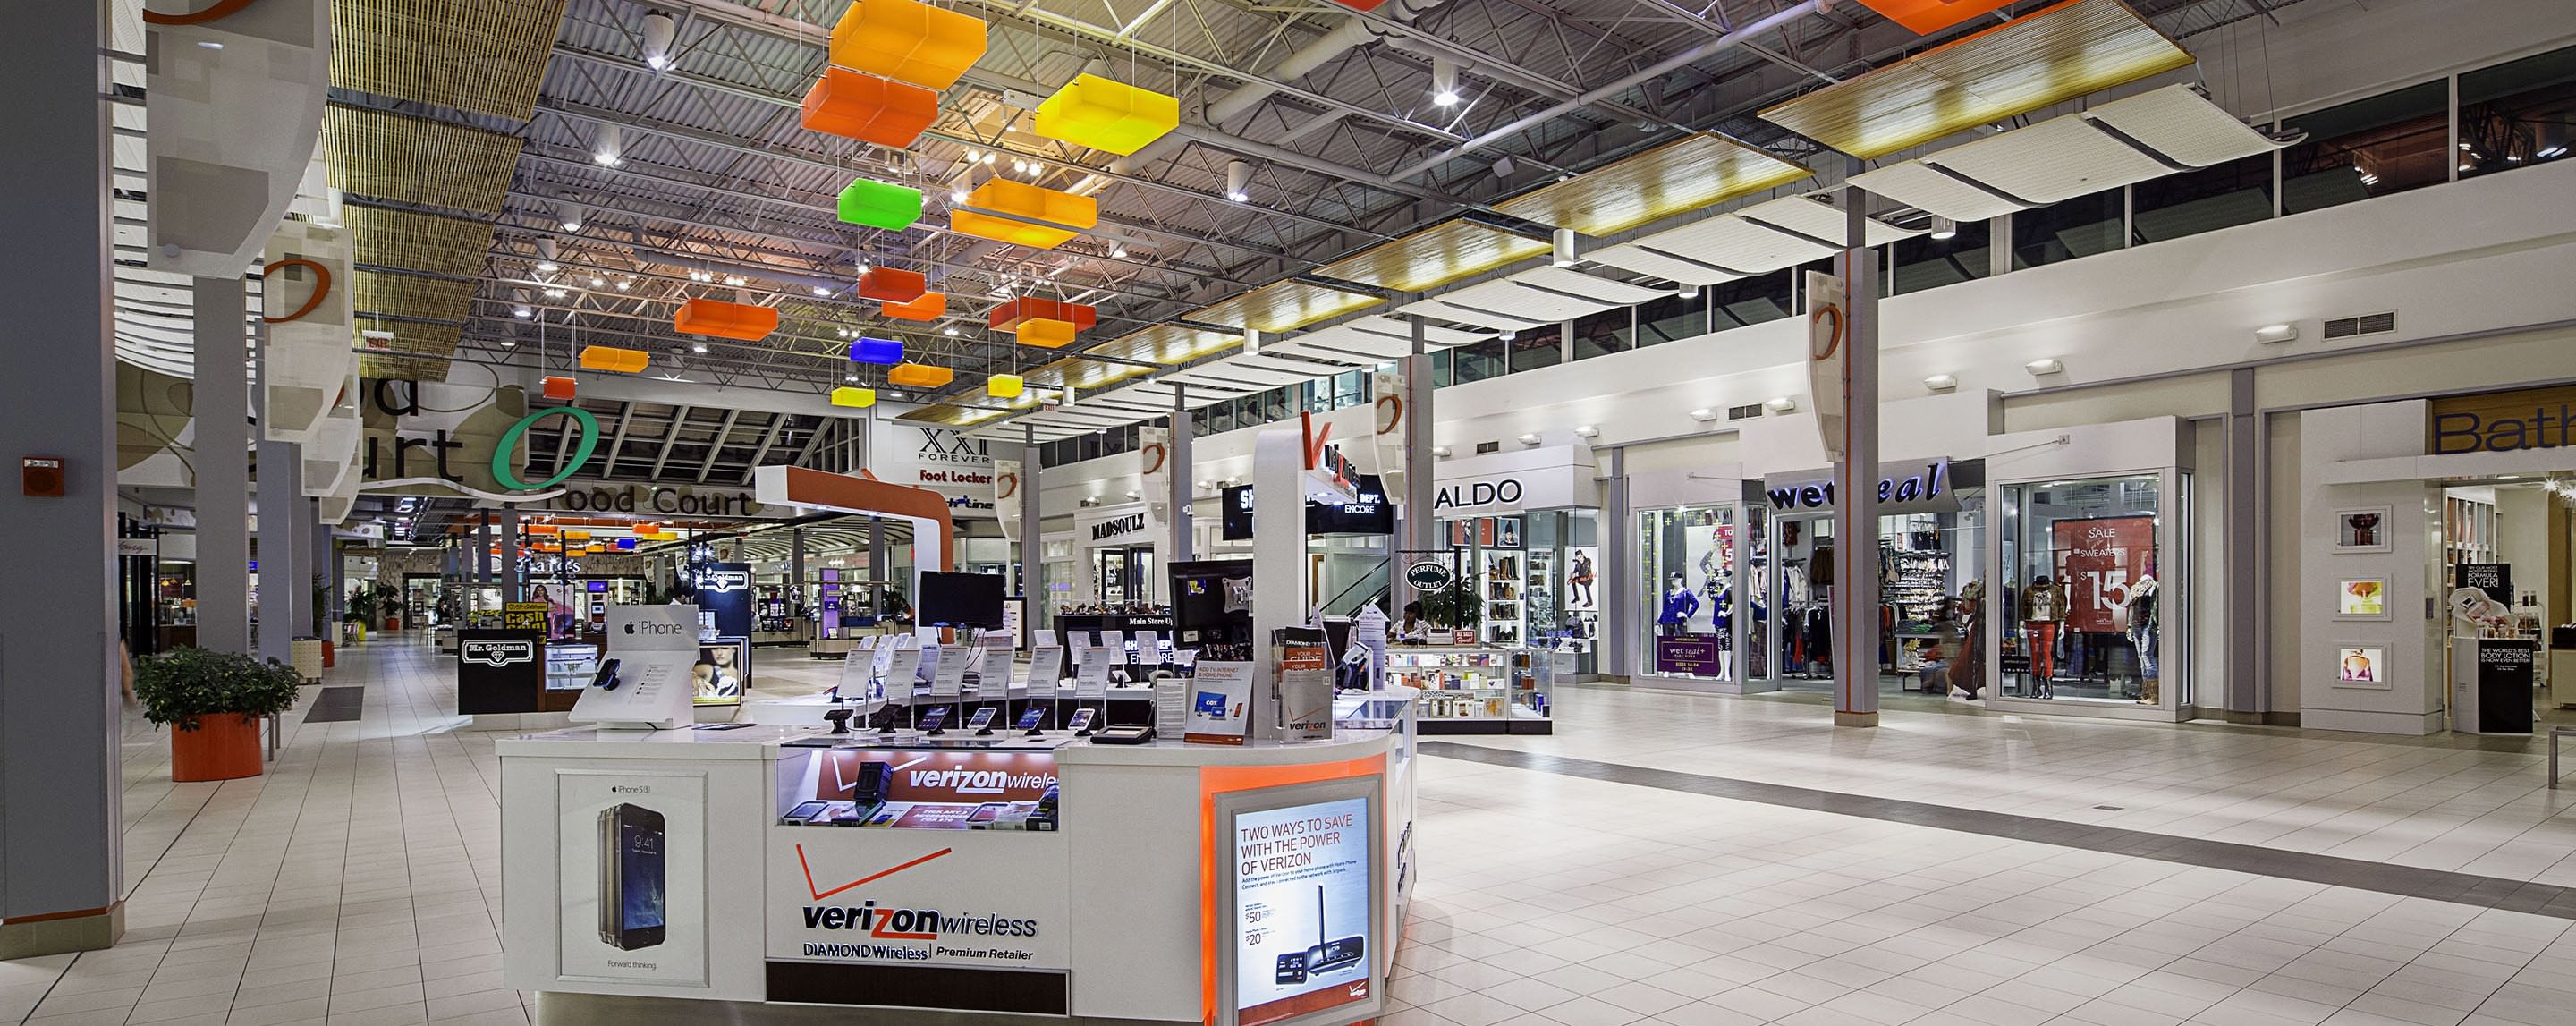 An interior of a mall with a variety of stores, including ALDO, Verizon, Foot Locker, and Mr. Goldman.